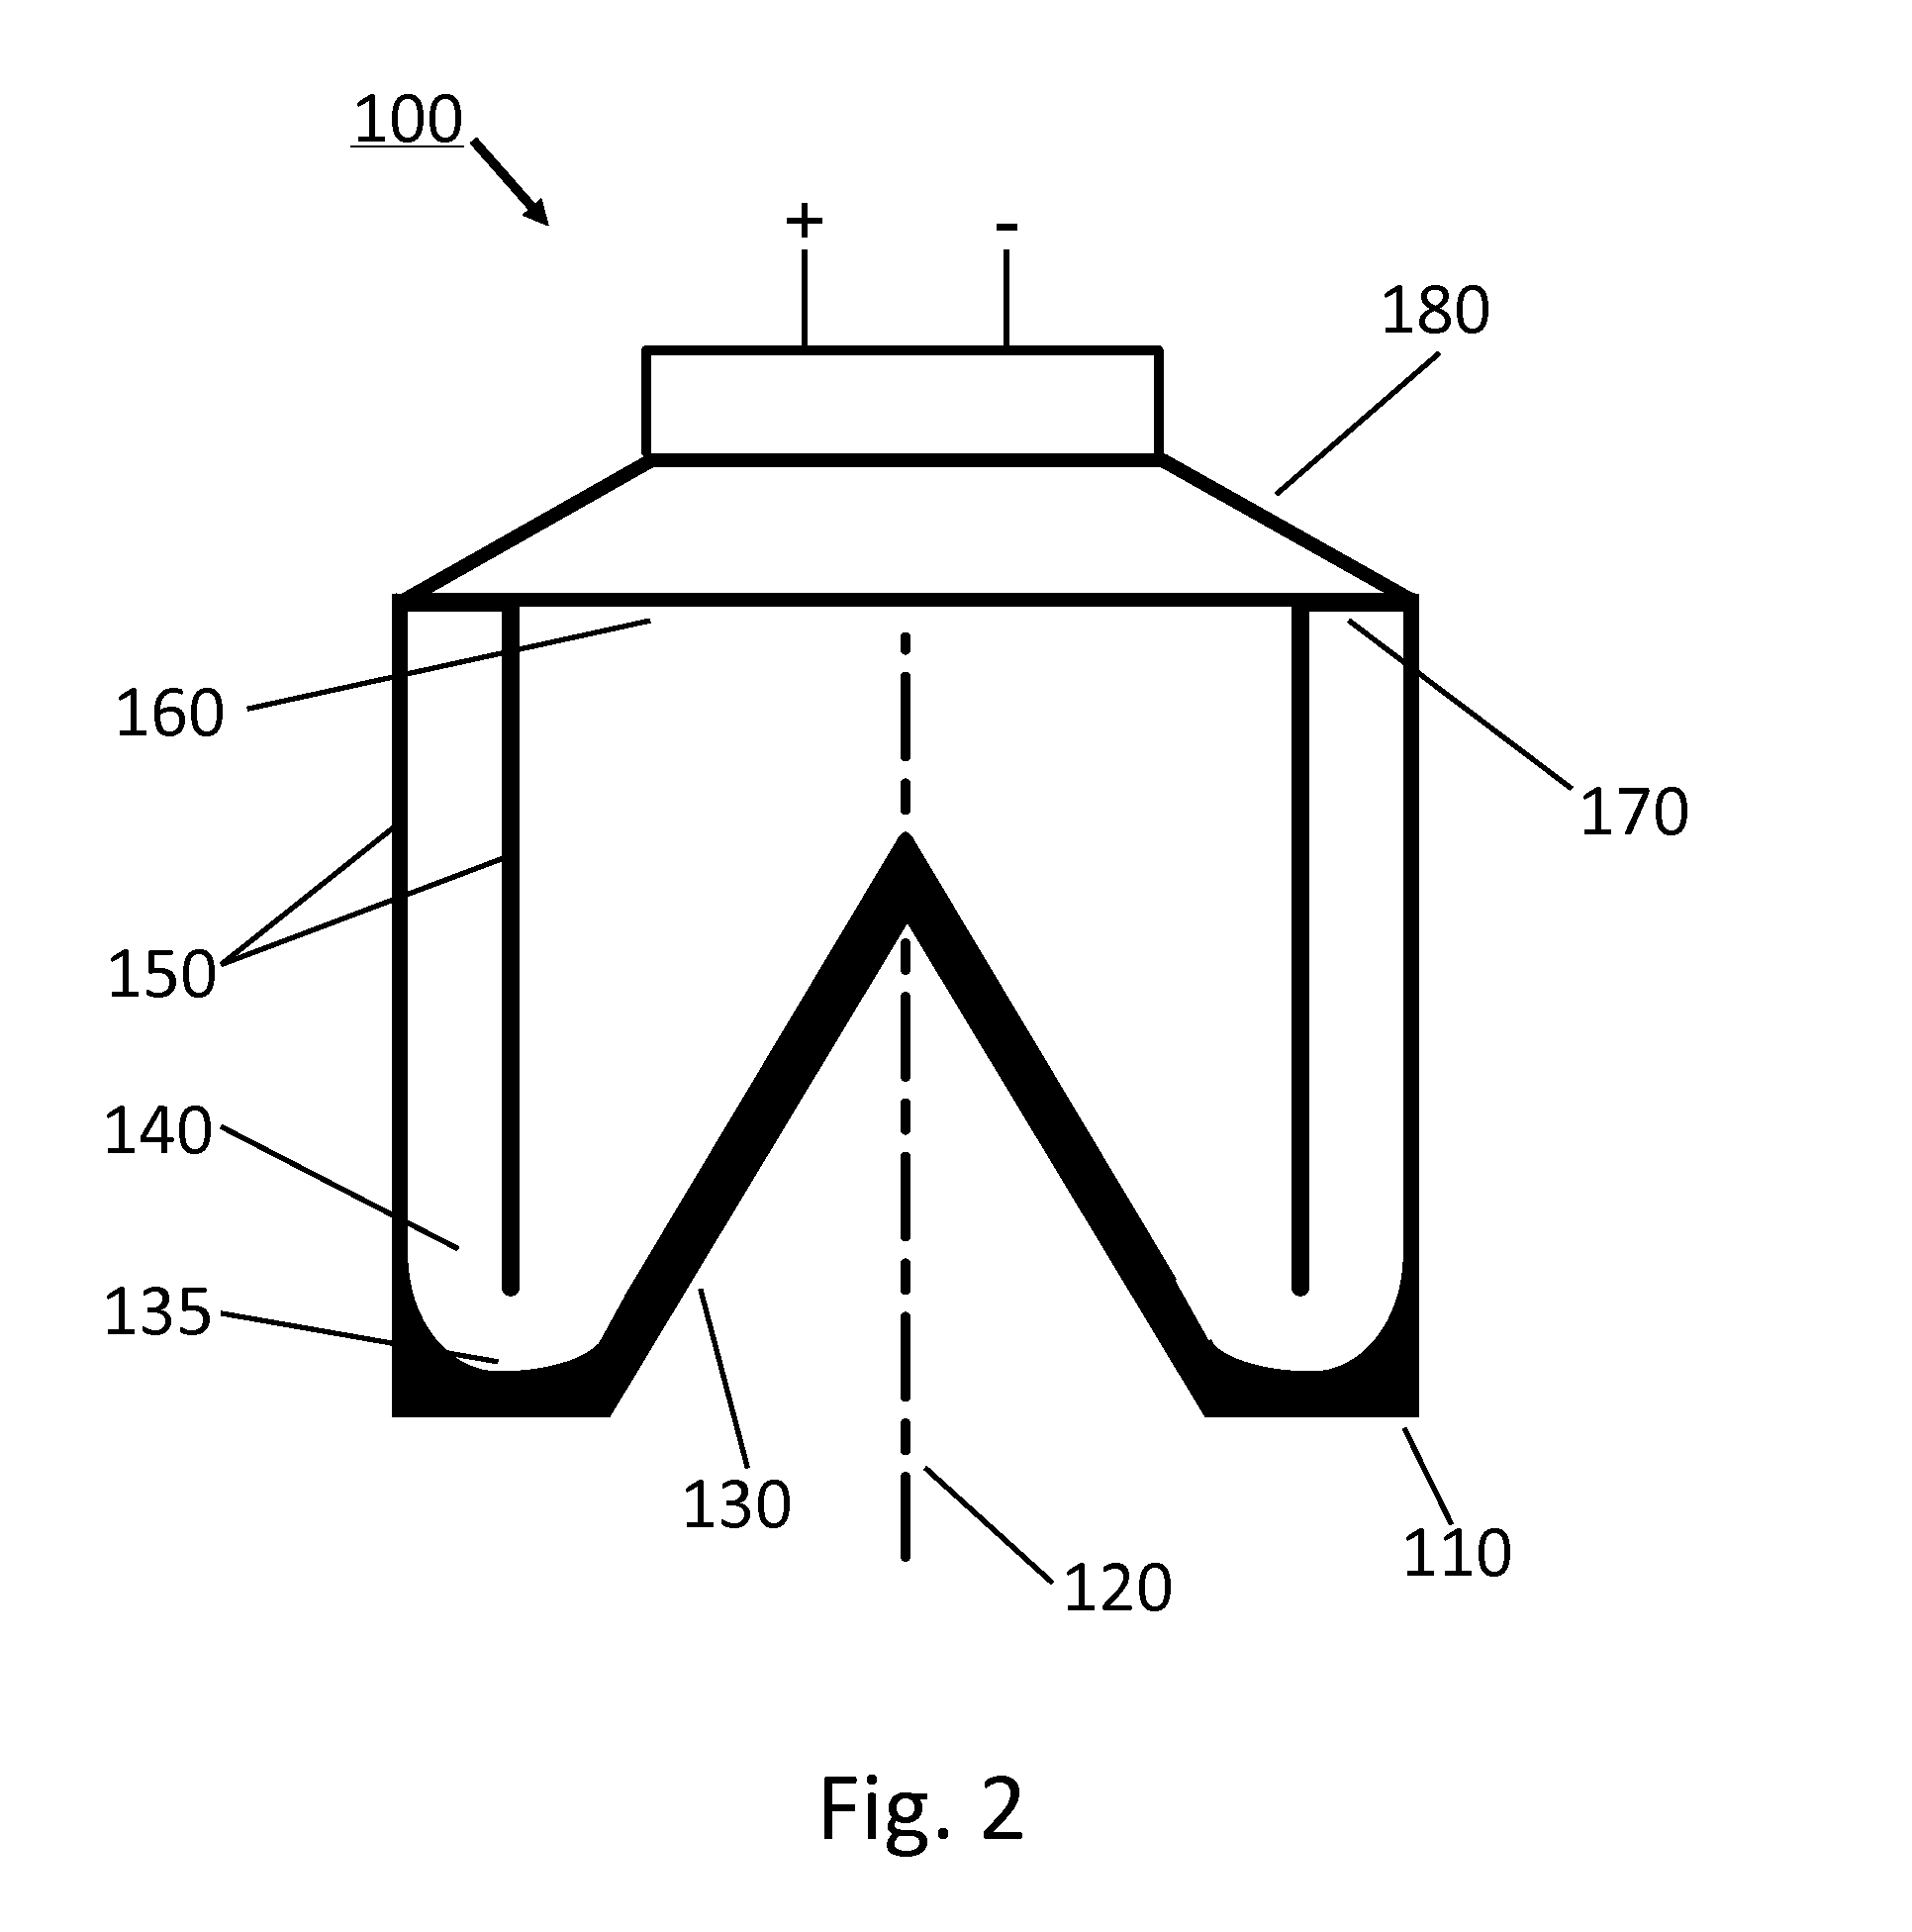 Life Safety Device with Folded Resonant Cavity for Low Frequency Alarm Tones